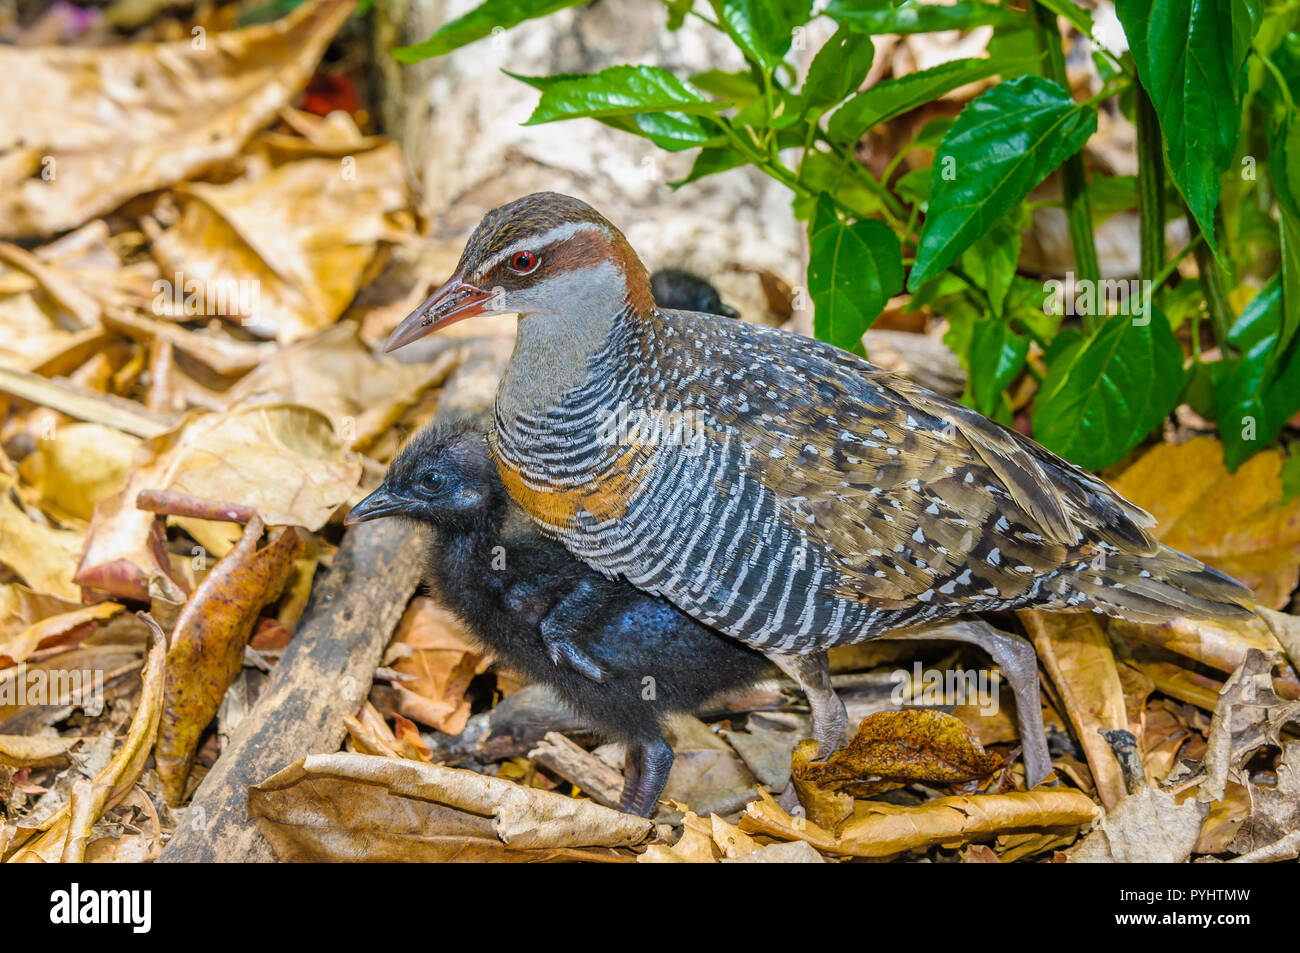 Buff-banded Rail mother, on an offshore Pacific island, exploring and feeding through the leaf litter habitat with its brood of hatchlings. Stock Photo